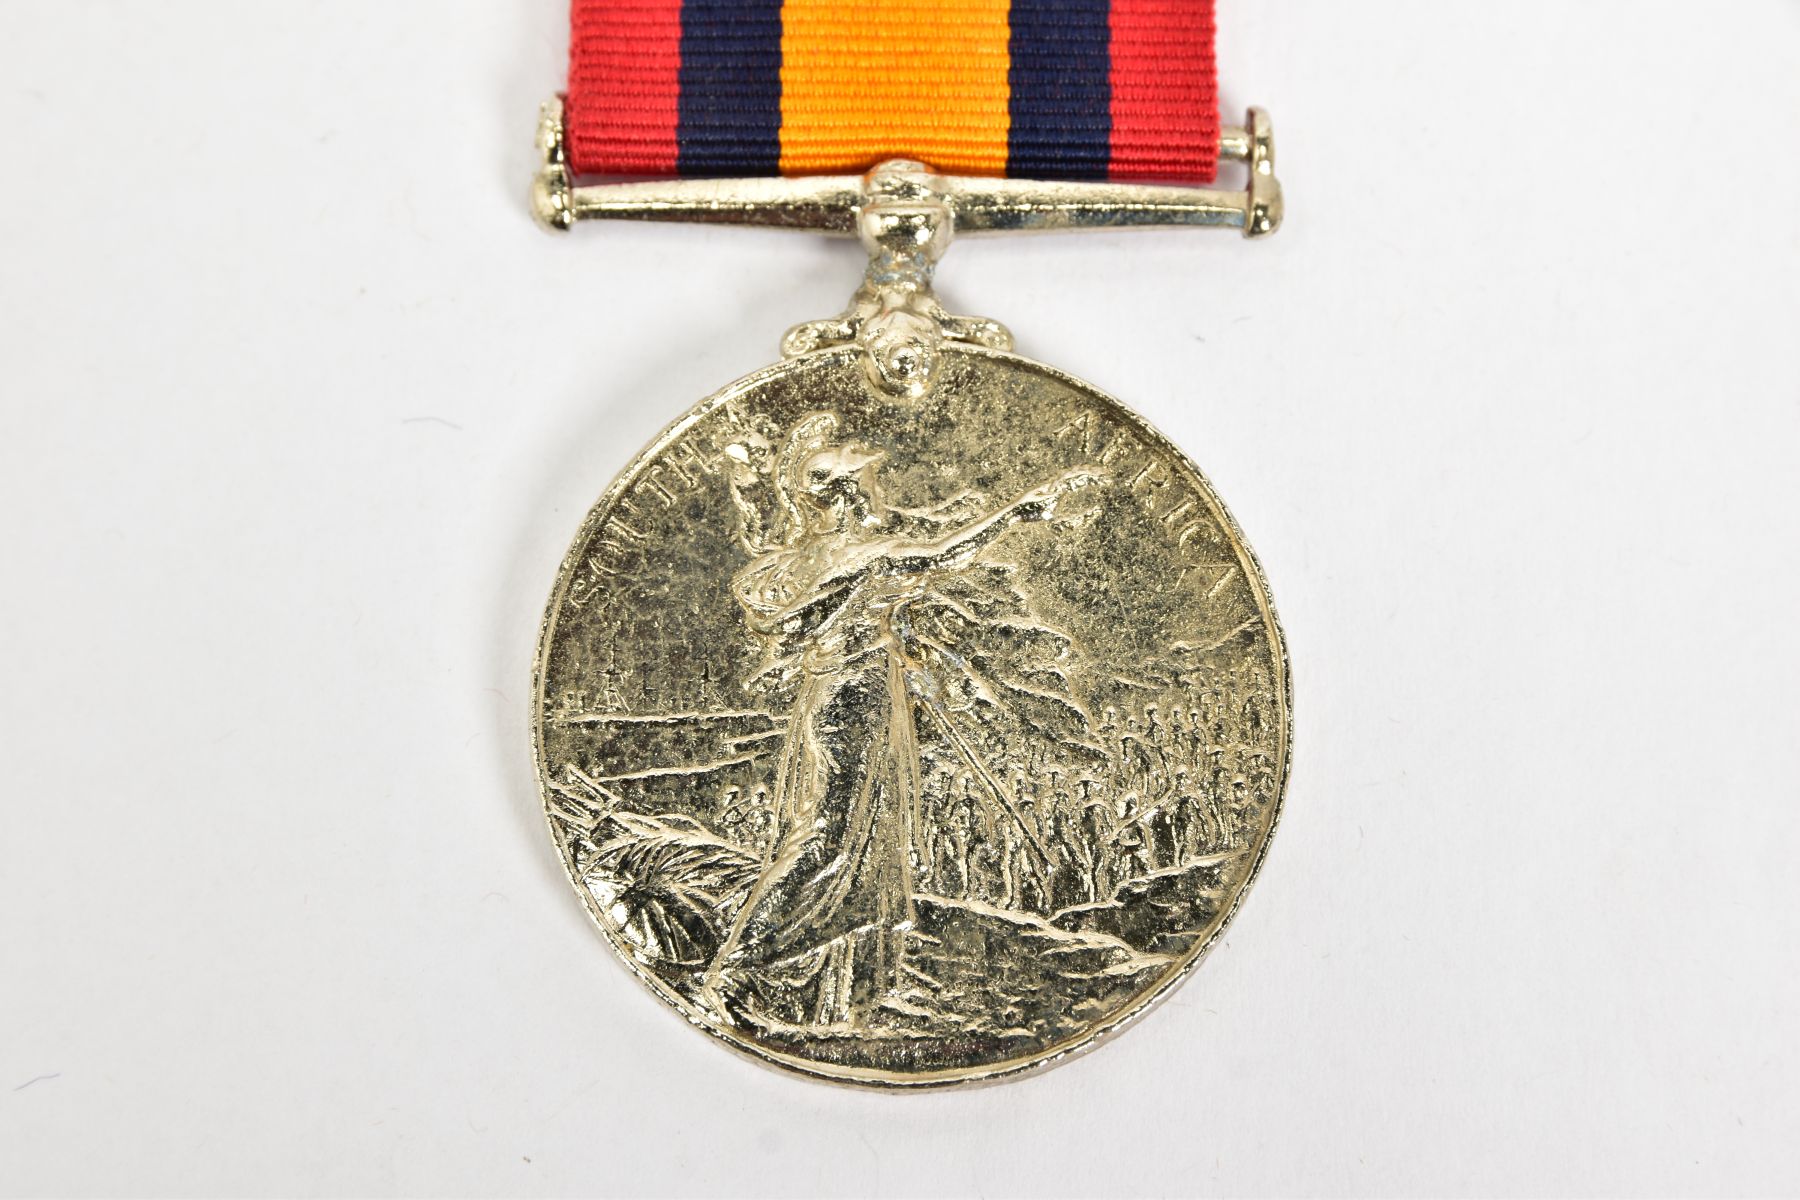 A CAST REPRODUCTION OF A QUEENS SOUTH AFRICA MEDAL, no bars, named 0733 W SAPr T. Comins, TEL BN R. - Image 4 of 7